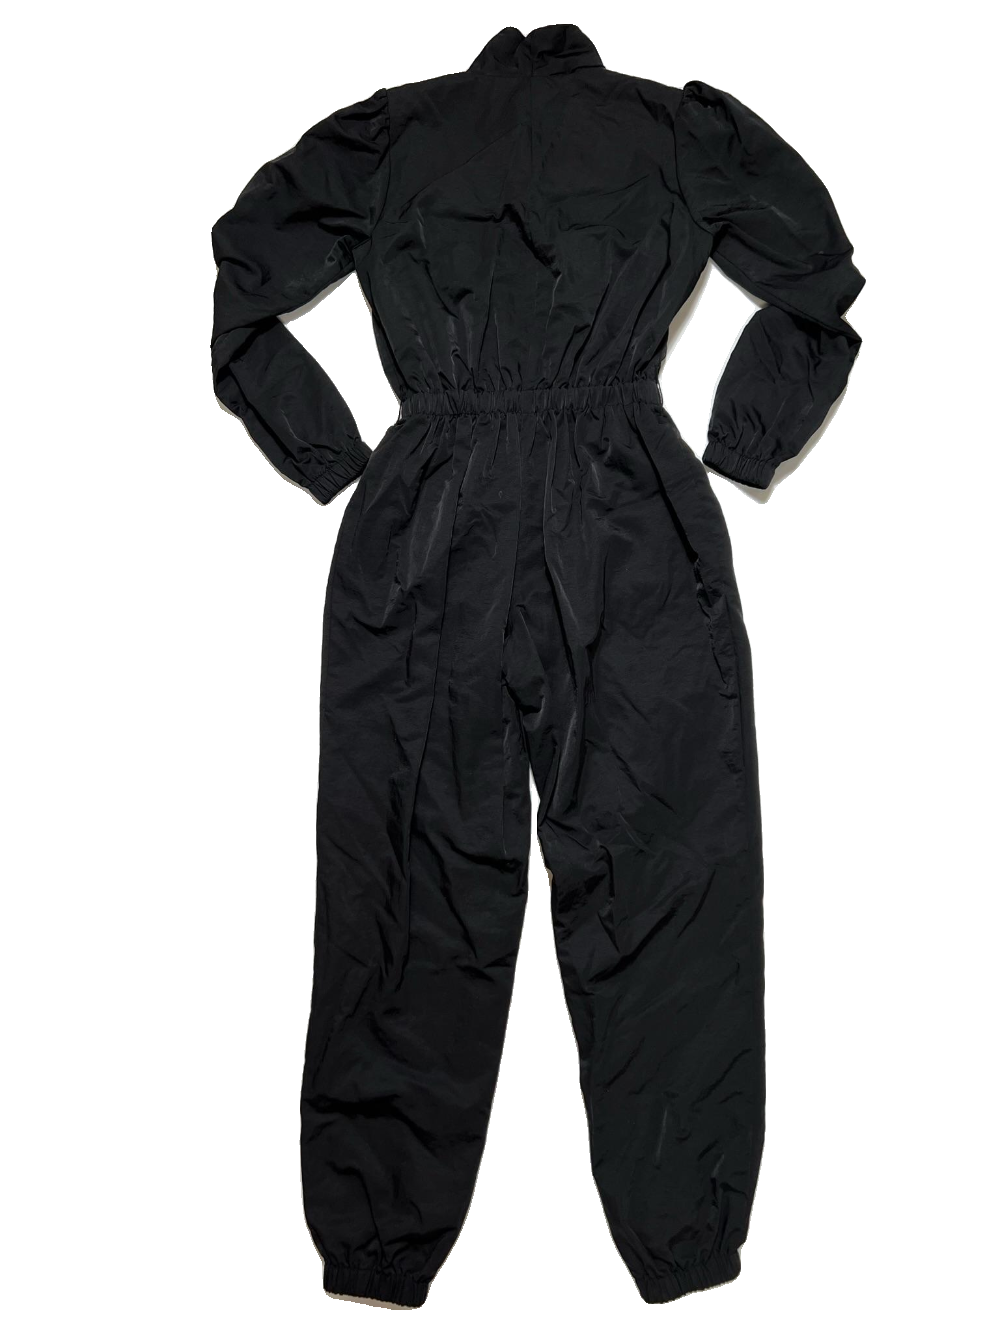 Lovers + Friends - Black Full Sleeve Jumpsuit - NEW WITH TAGS